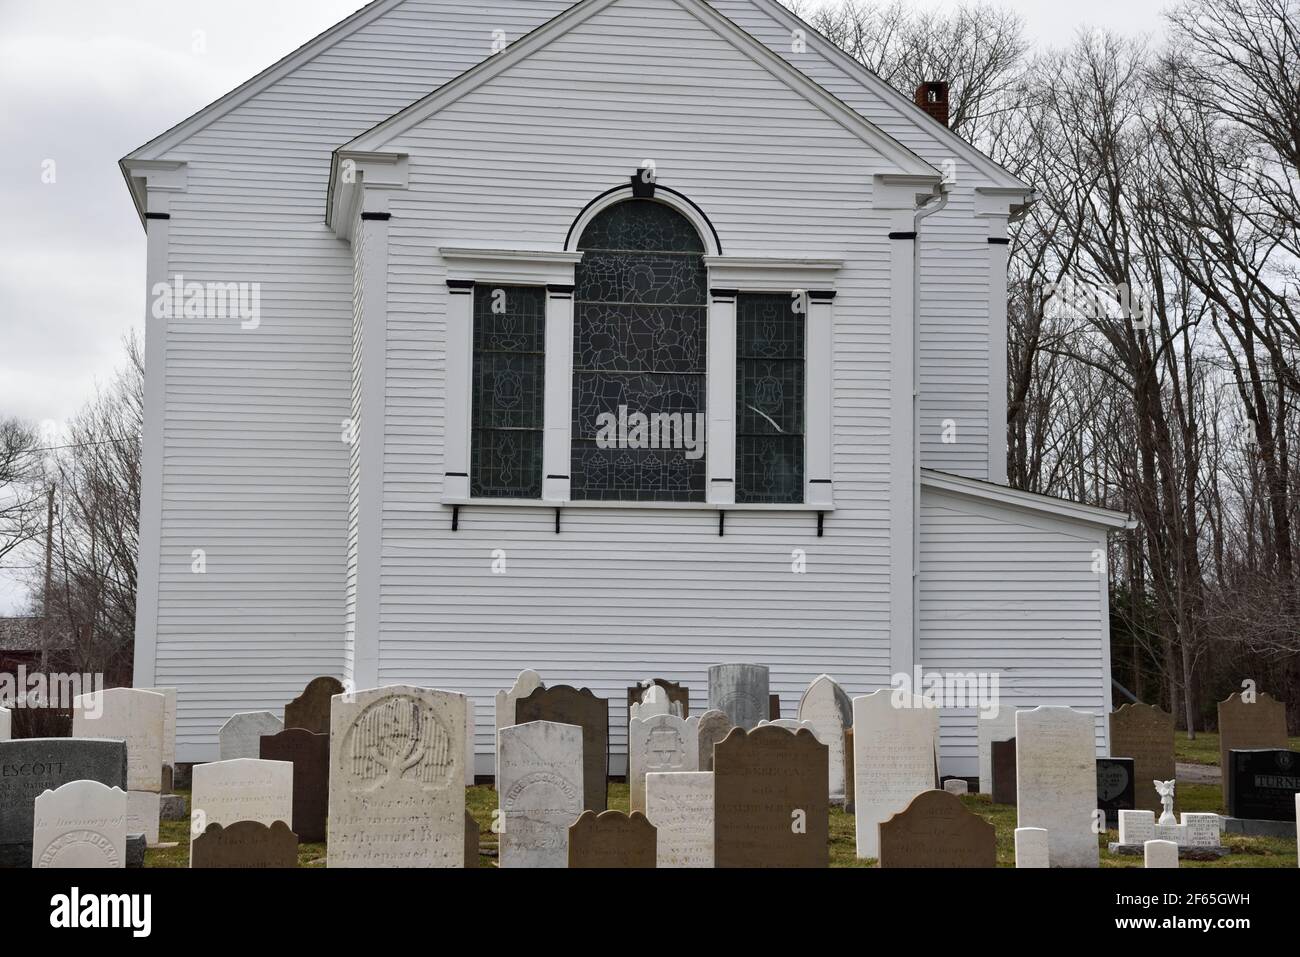 Lovely old white clapboard St. John's Anglican Church established in 1760 Surrounded by old gravestones in Port Williams, Nova Scotia Canada Stock Photo